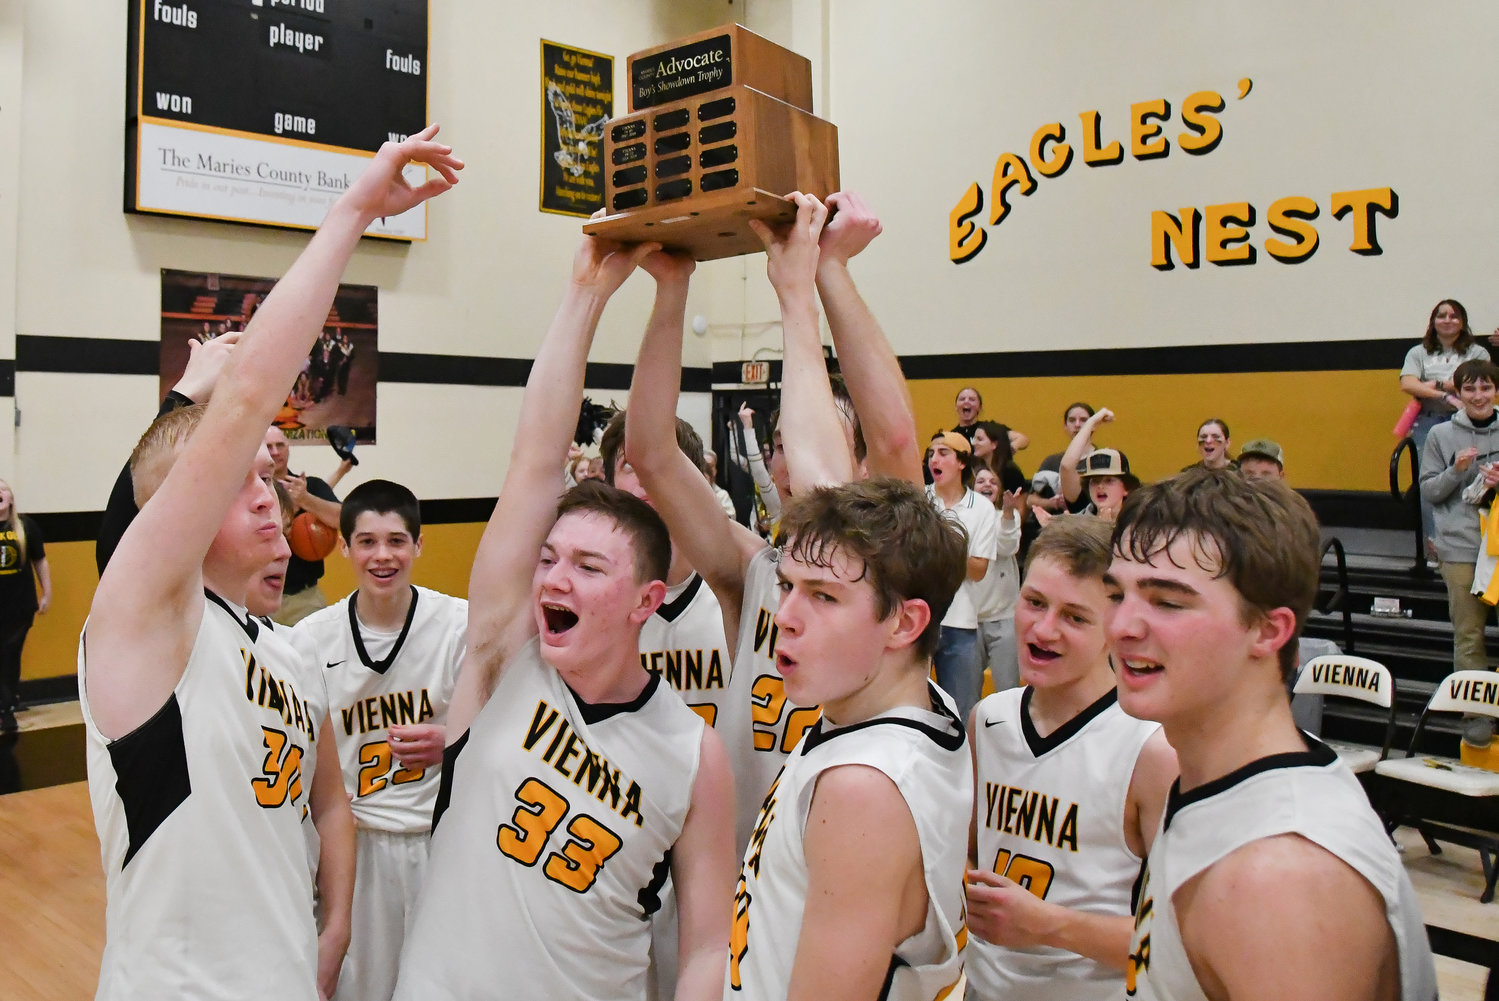 The Vienna boys beat Belle to claim the traveling trophy on Tuesday.